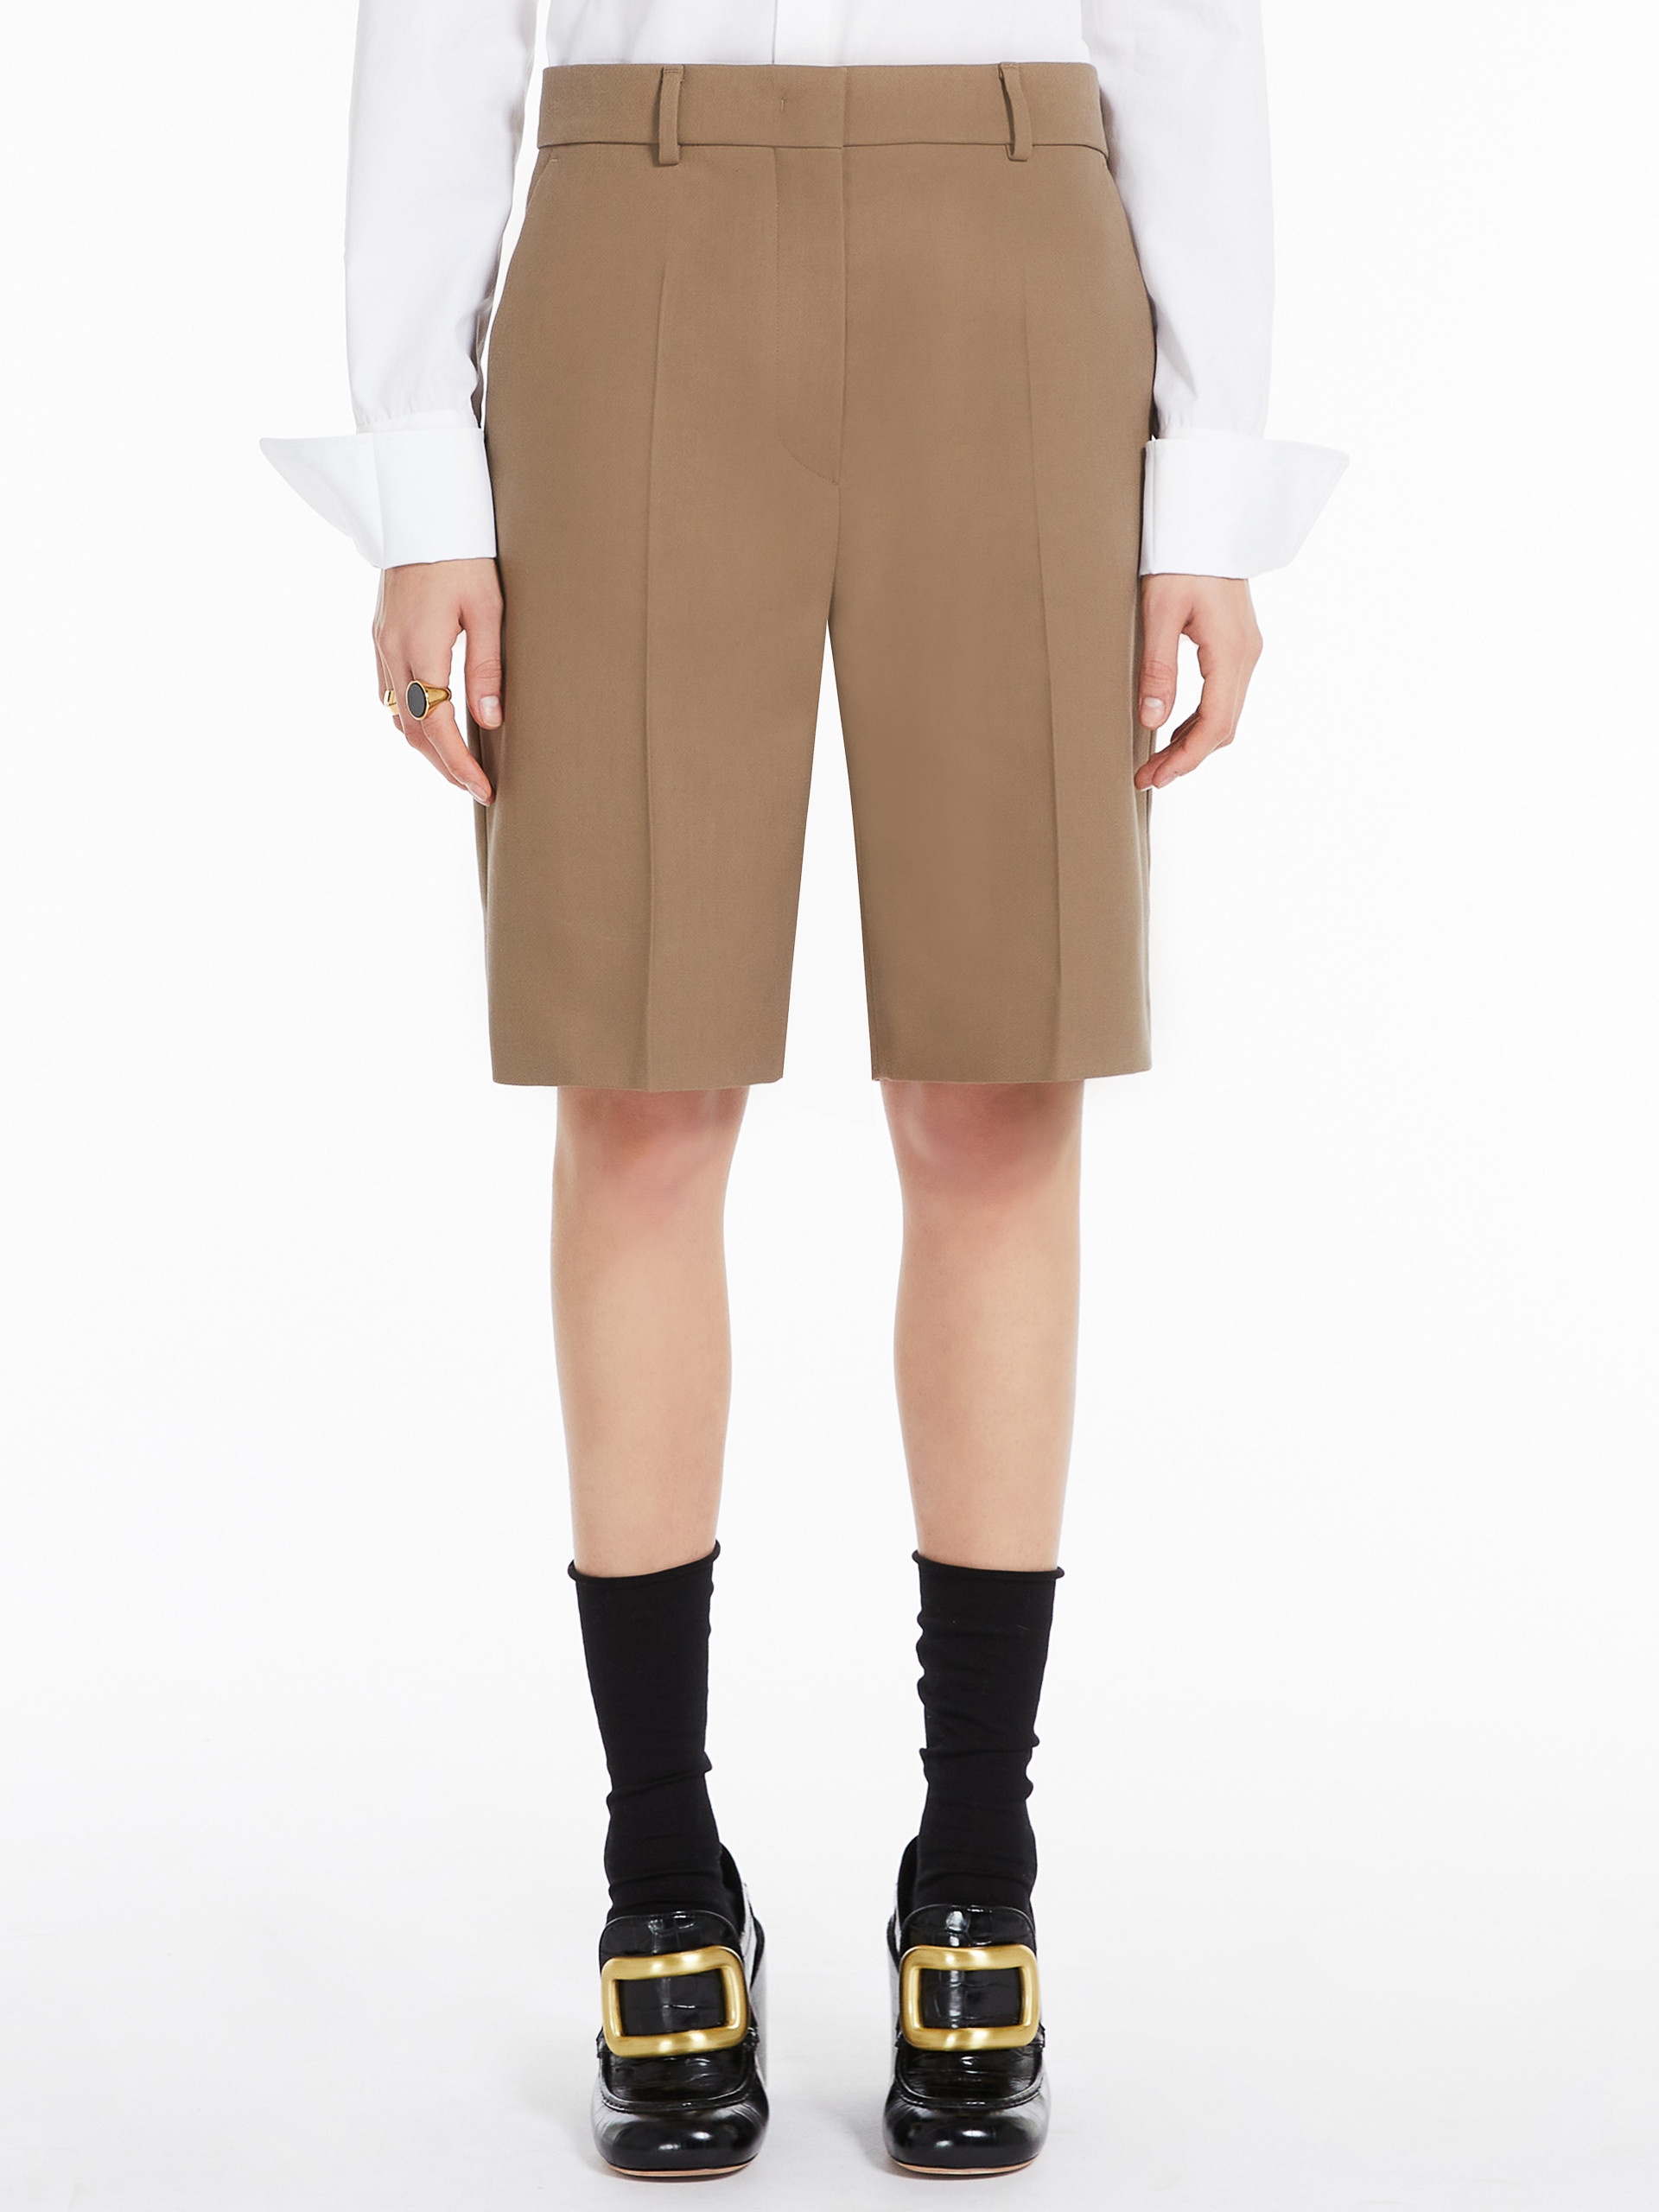 OCRA Tailoring-inspired Bermuda shorts in cotton and viscose - 3